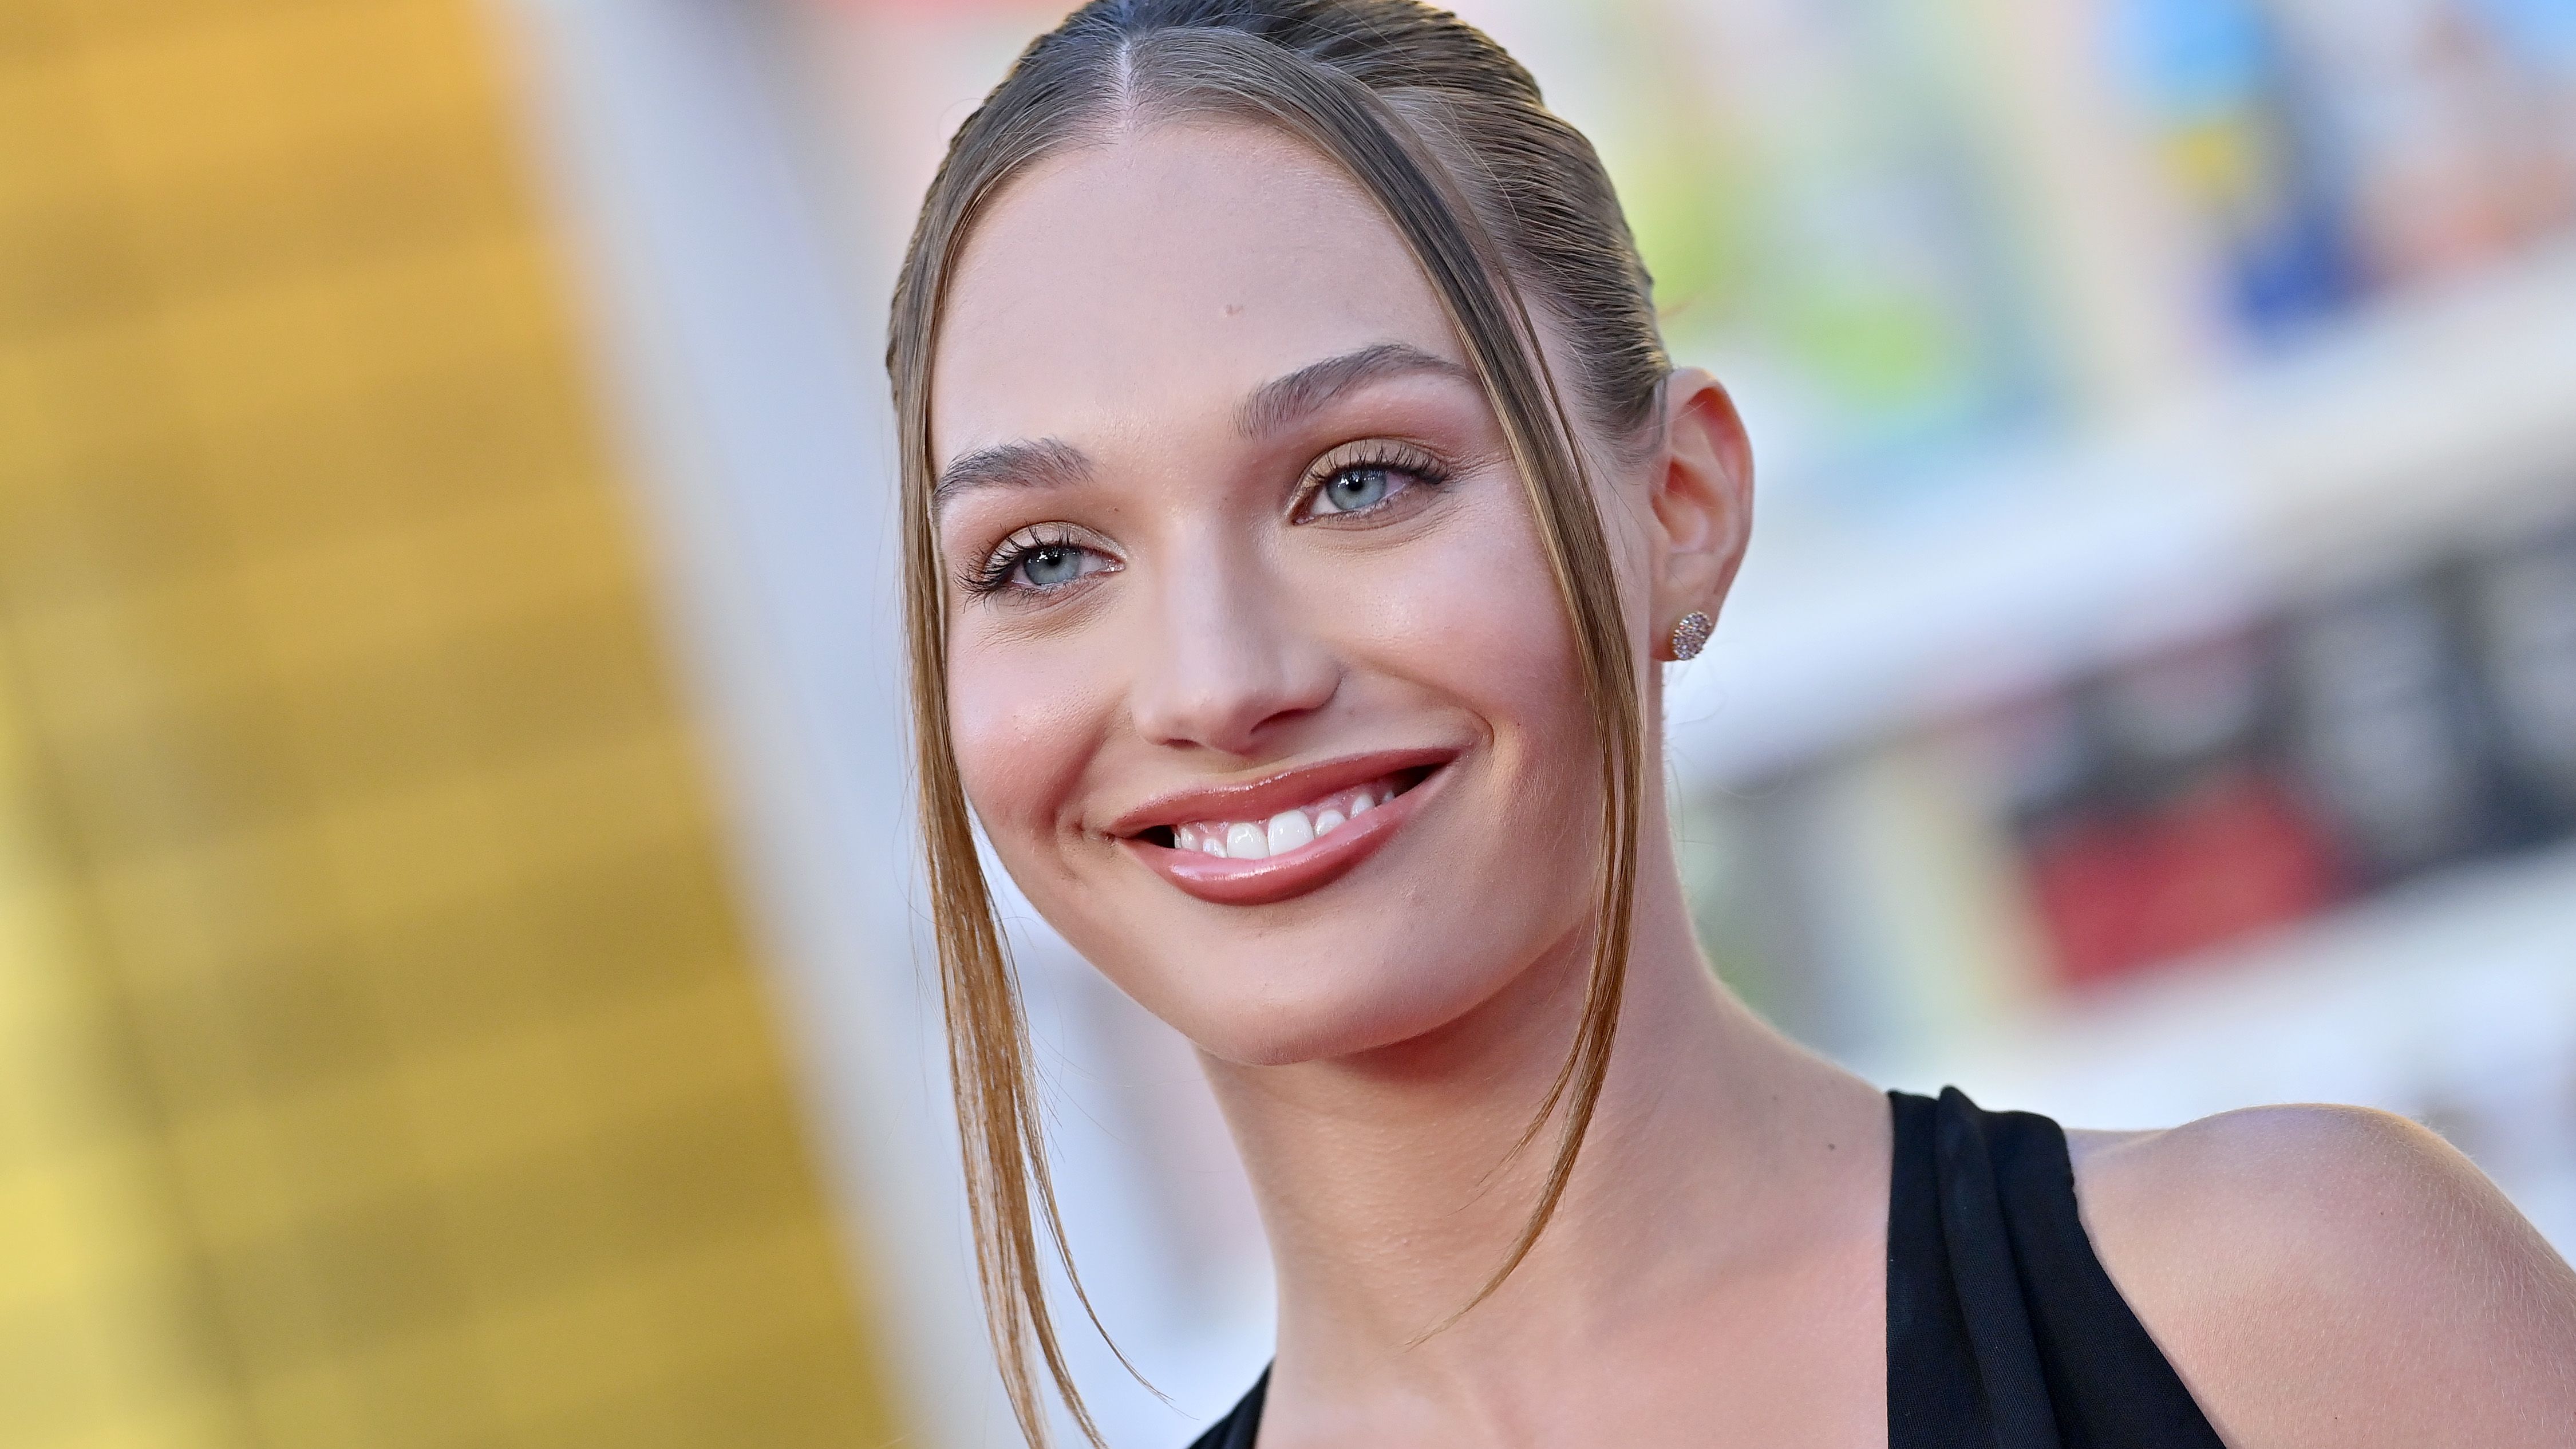 32 Facts about Maddie Ziegler - Facts.net